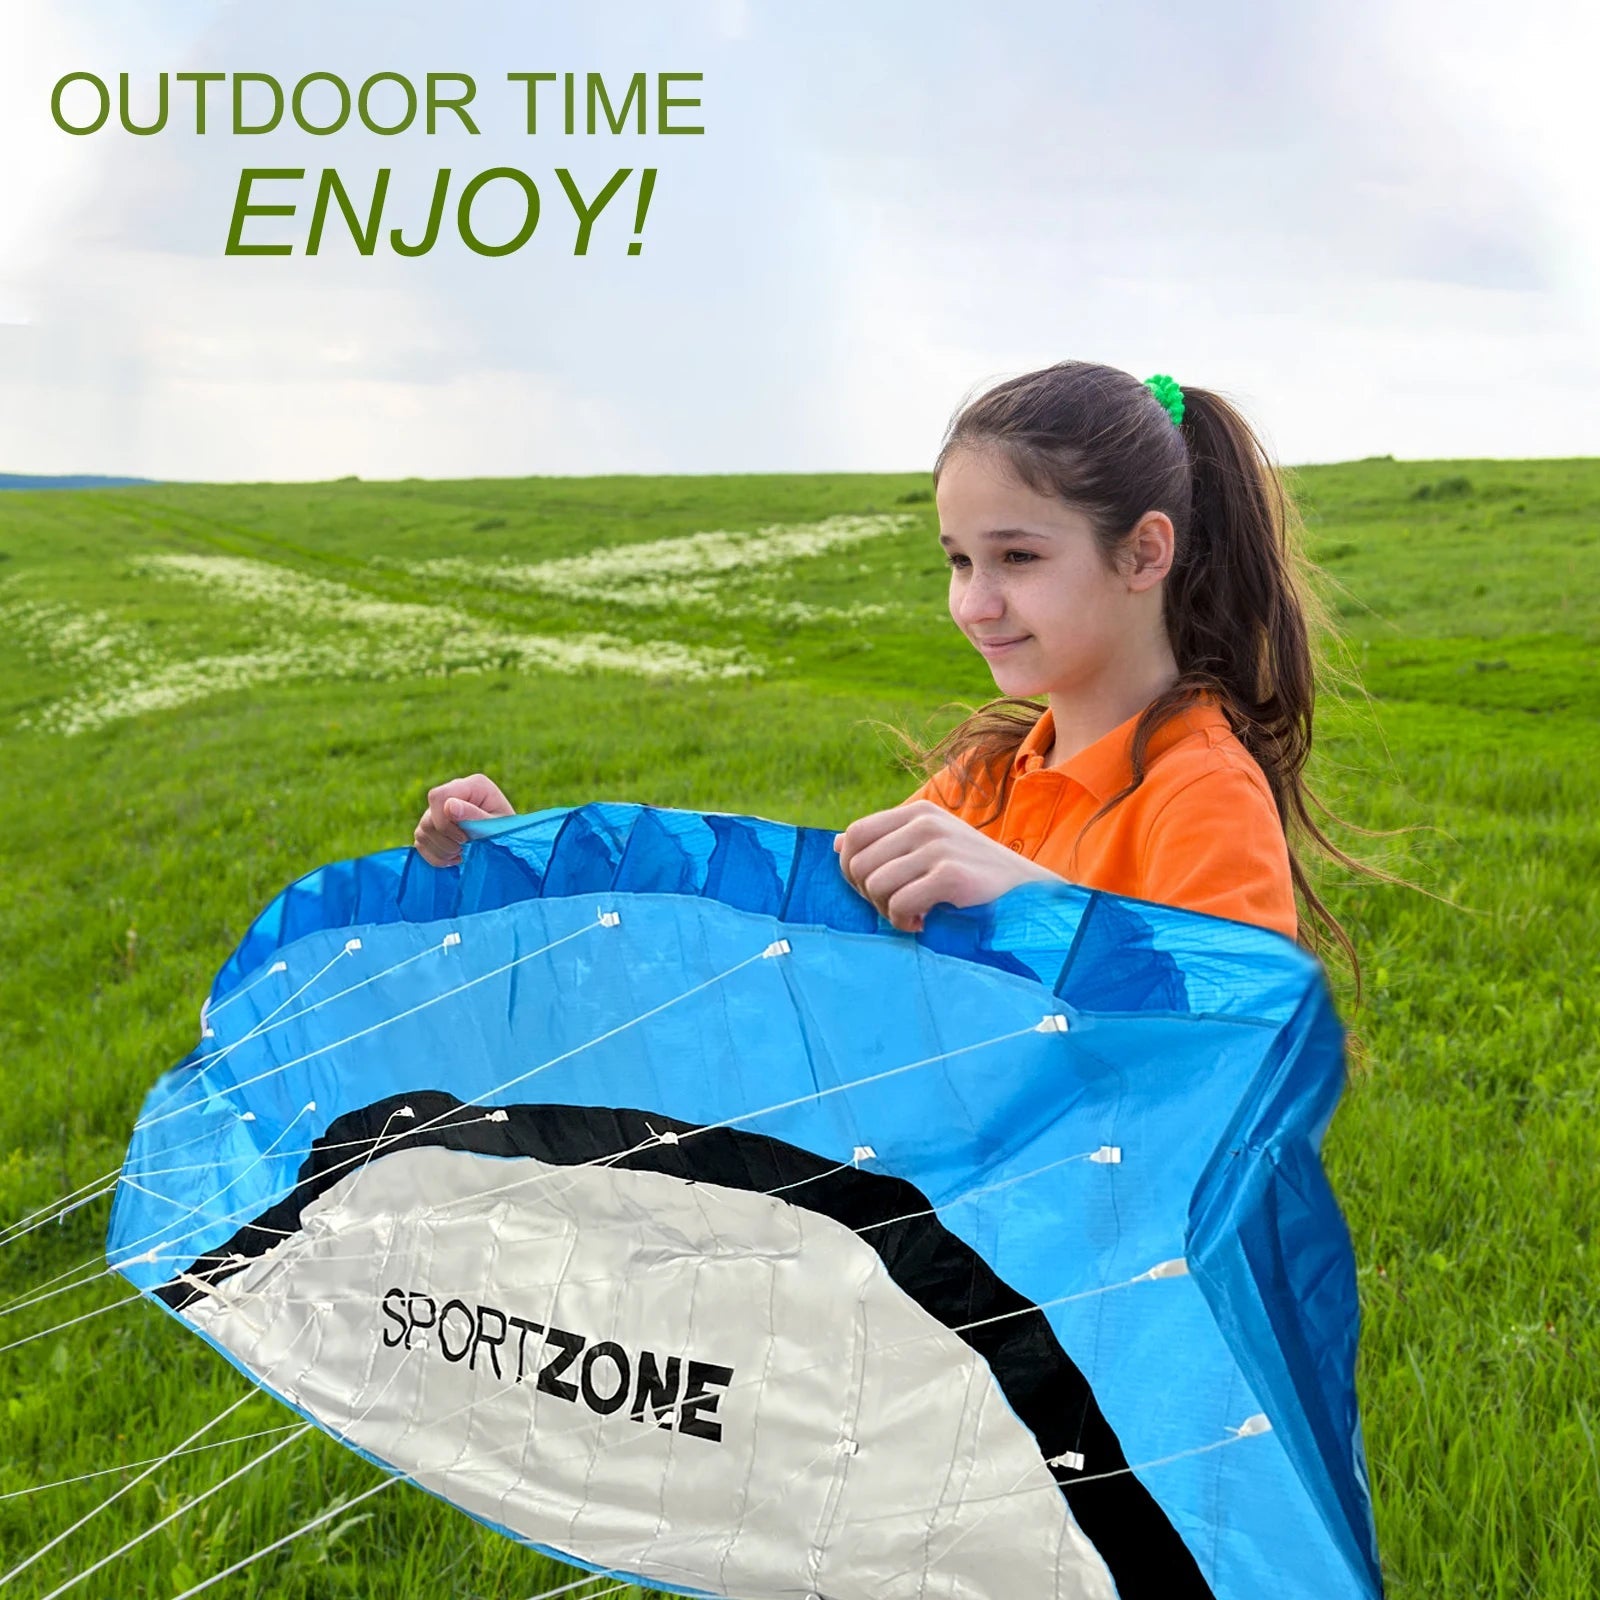 Dual Line 2.5m Parafoil Kite with Handle, Line, and Backpack - ToylandEU